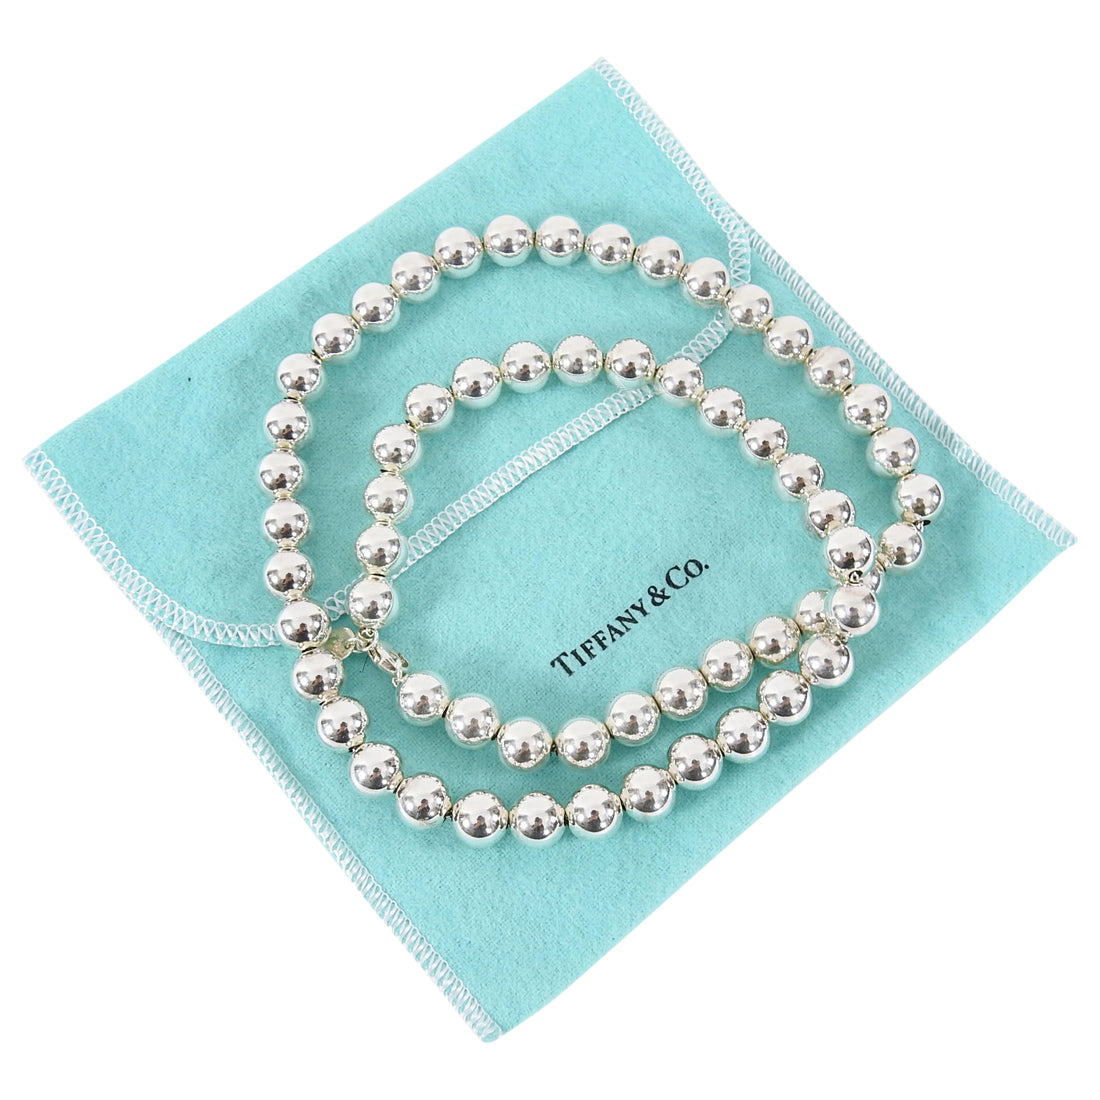 Tiffany and Co. Hardwear Long Sterling Silver Ball Bead Necklace